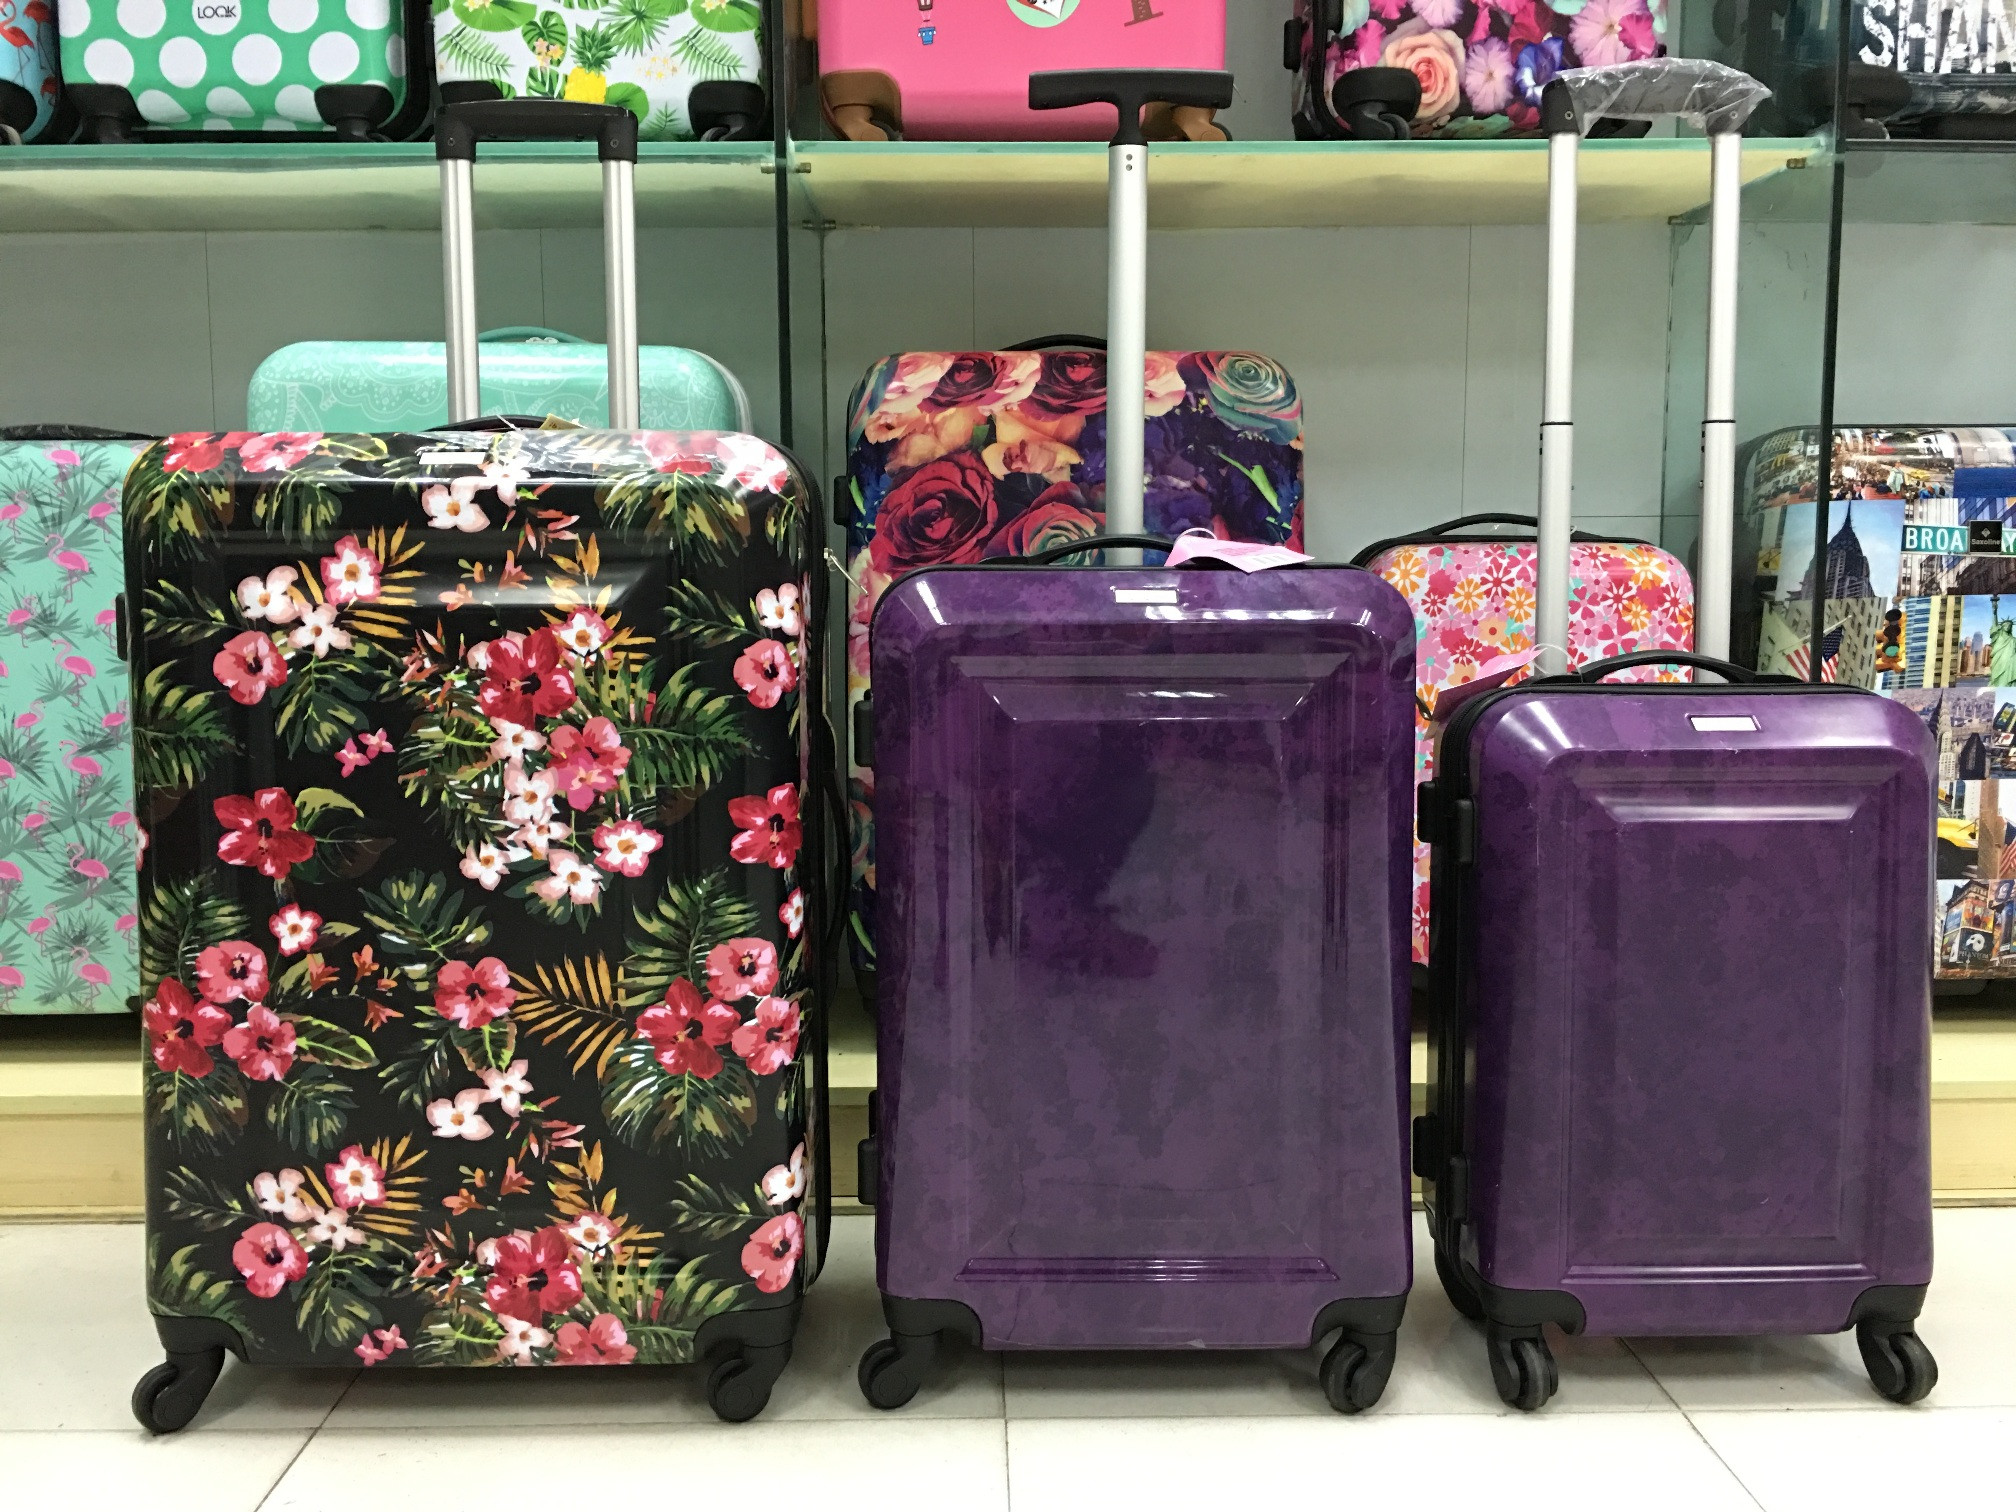 yanteng samsonite luggage with deluxe design